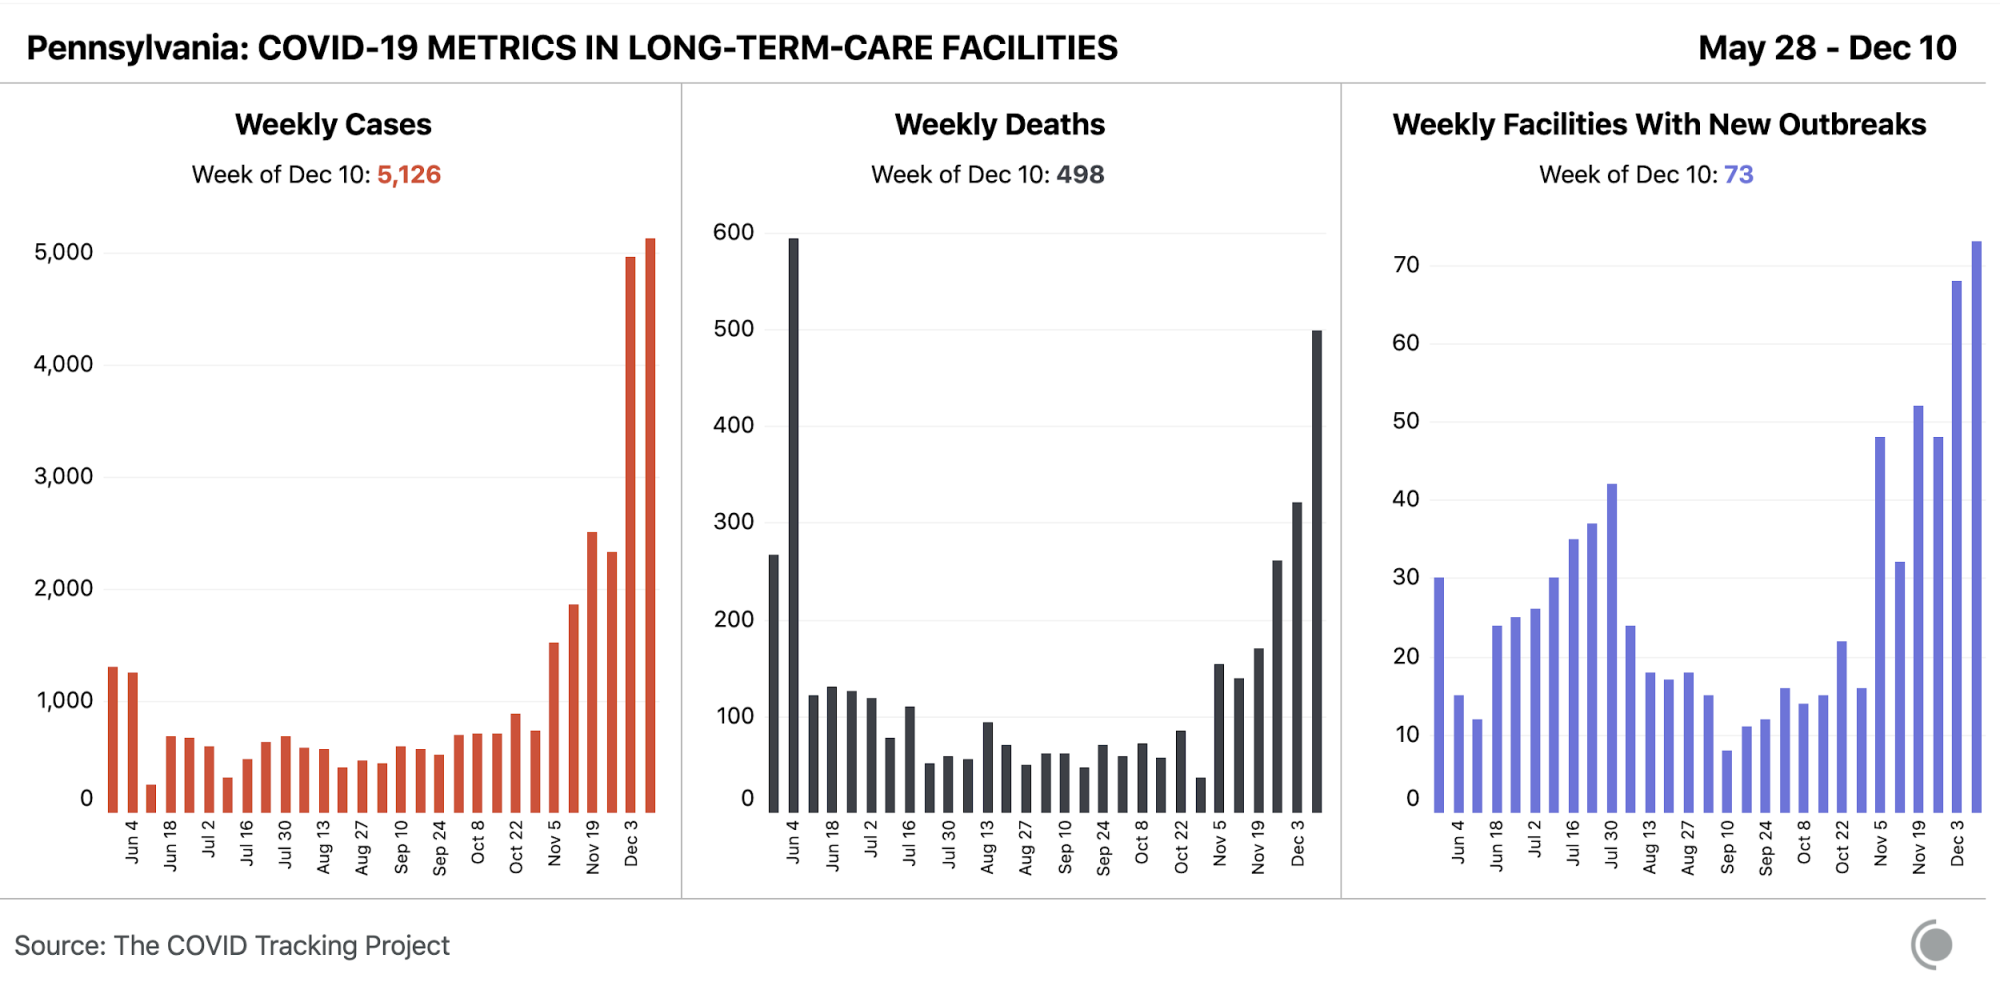 Bar chart of weekly cases, deaths, and facilities with new outbreaks in Pennsylvania. This week's new cases and facilities with new outbreaks are the highest data points in their respective graphs.